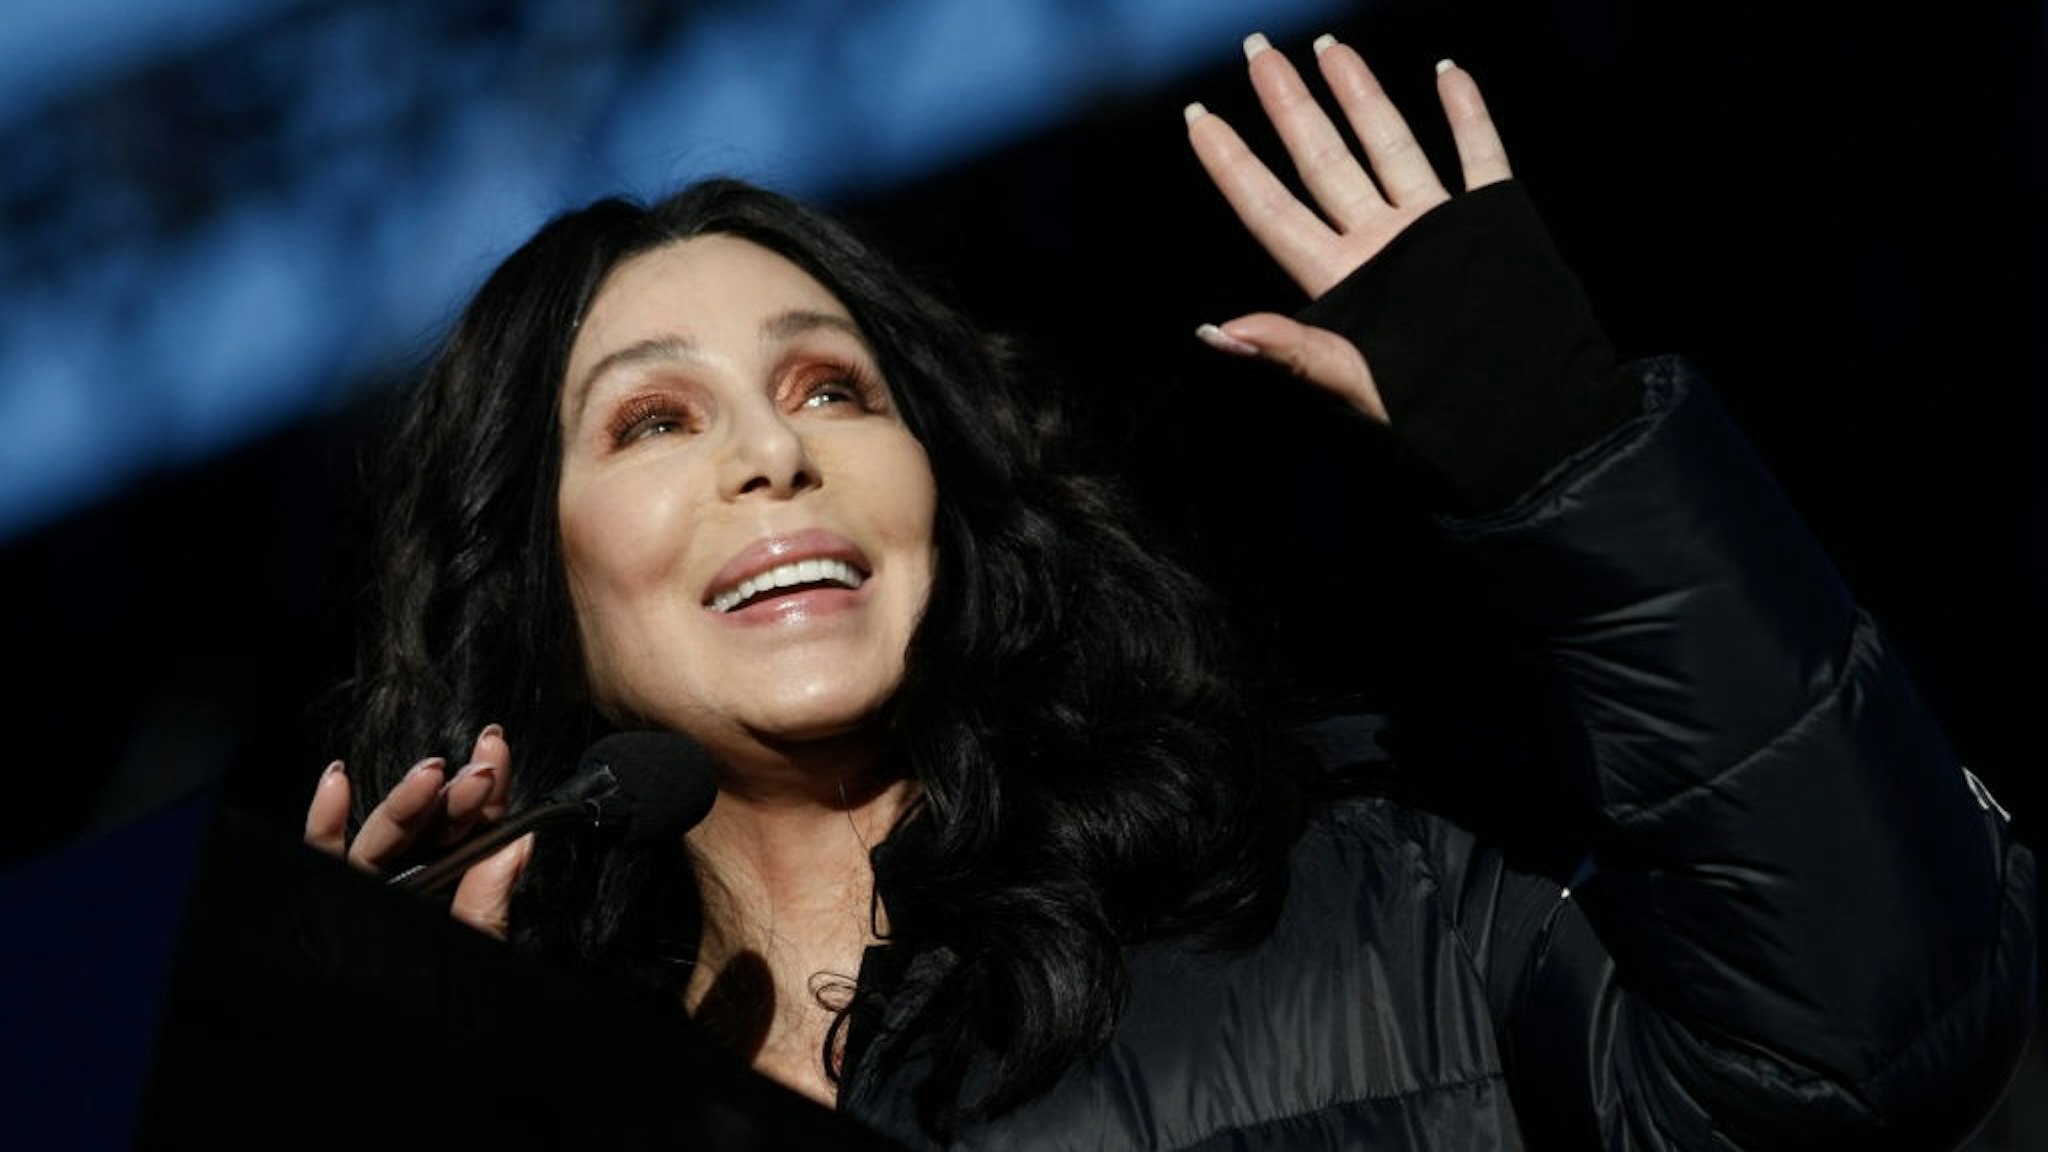 Singer/actress Cher speaks during the Women's March "Power to the Polls" voter registration tour launch at Sam Boyd Stadium on January 21, 2018, in Las Vegas, Nevada.